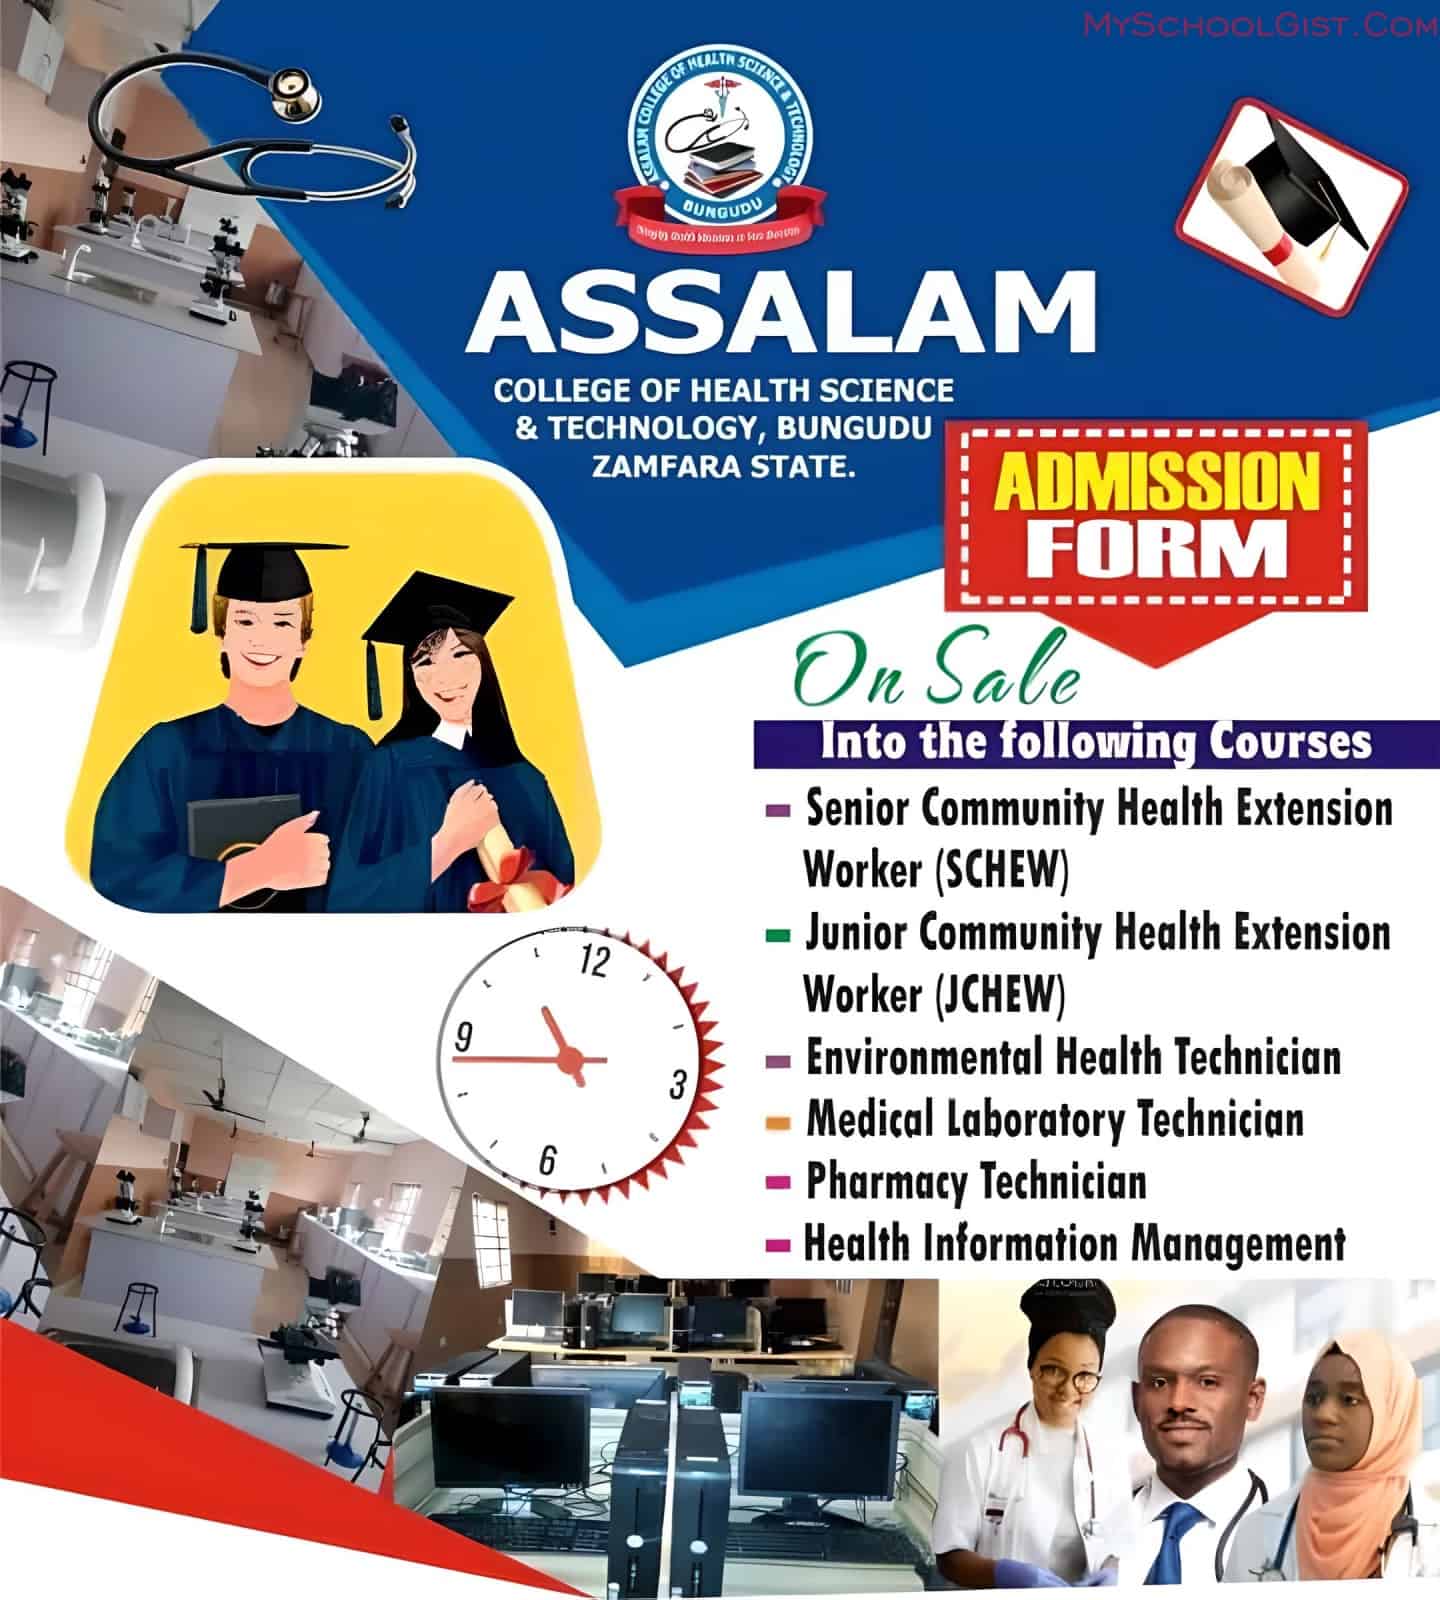 Assalam College of Health Science and Technology Admission Form